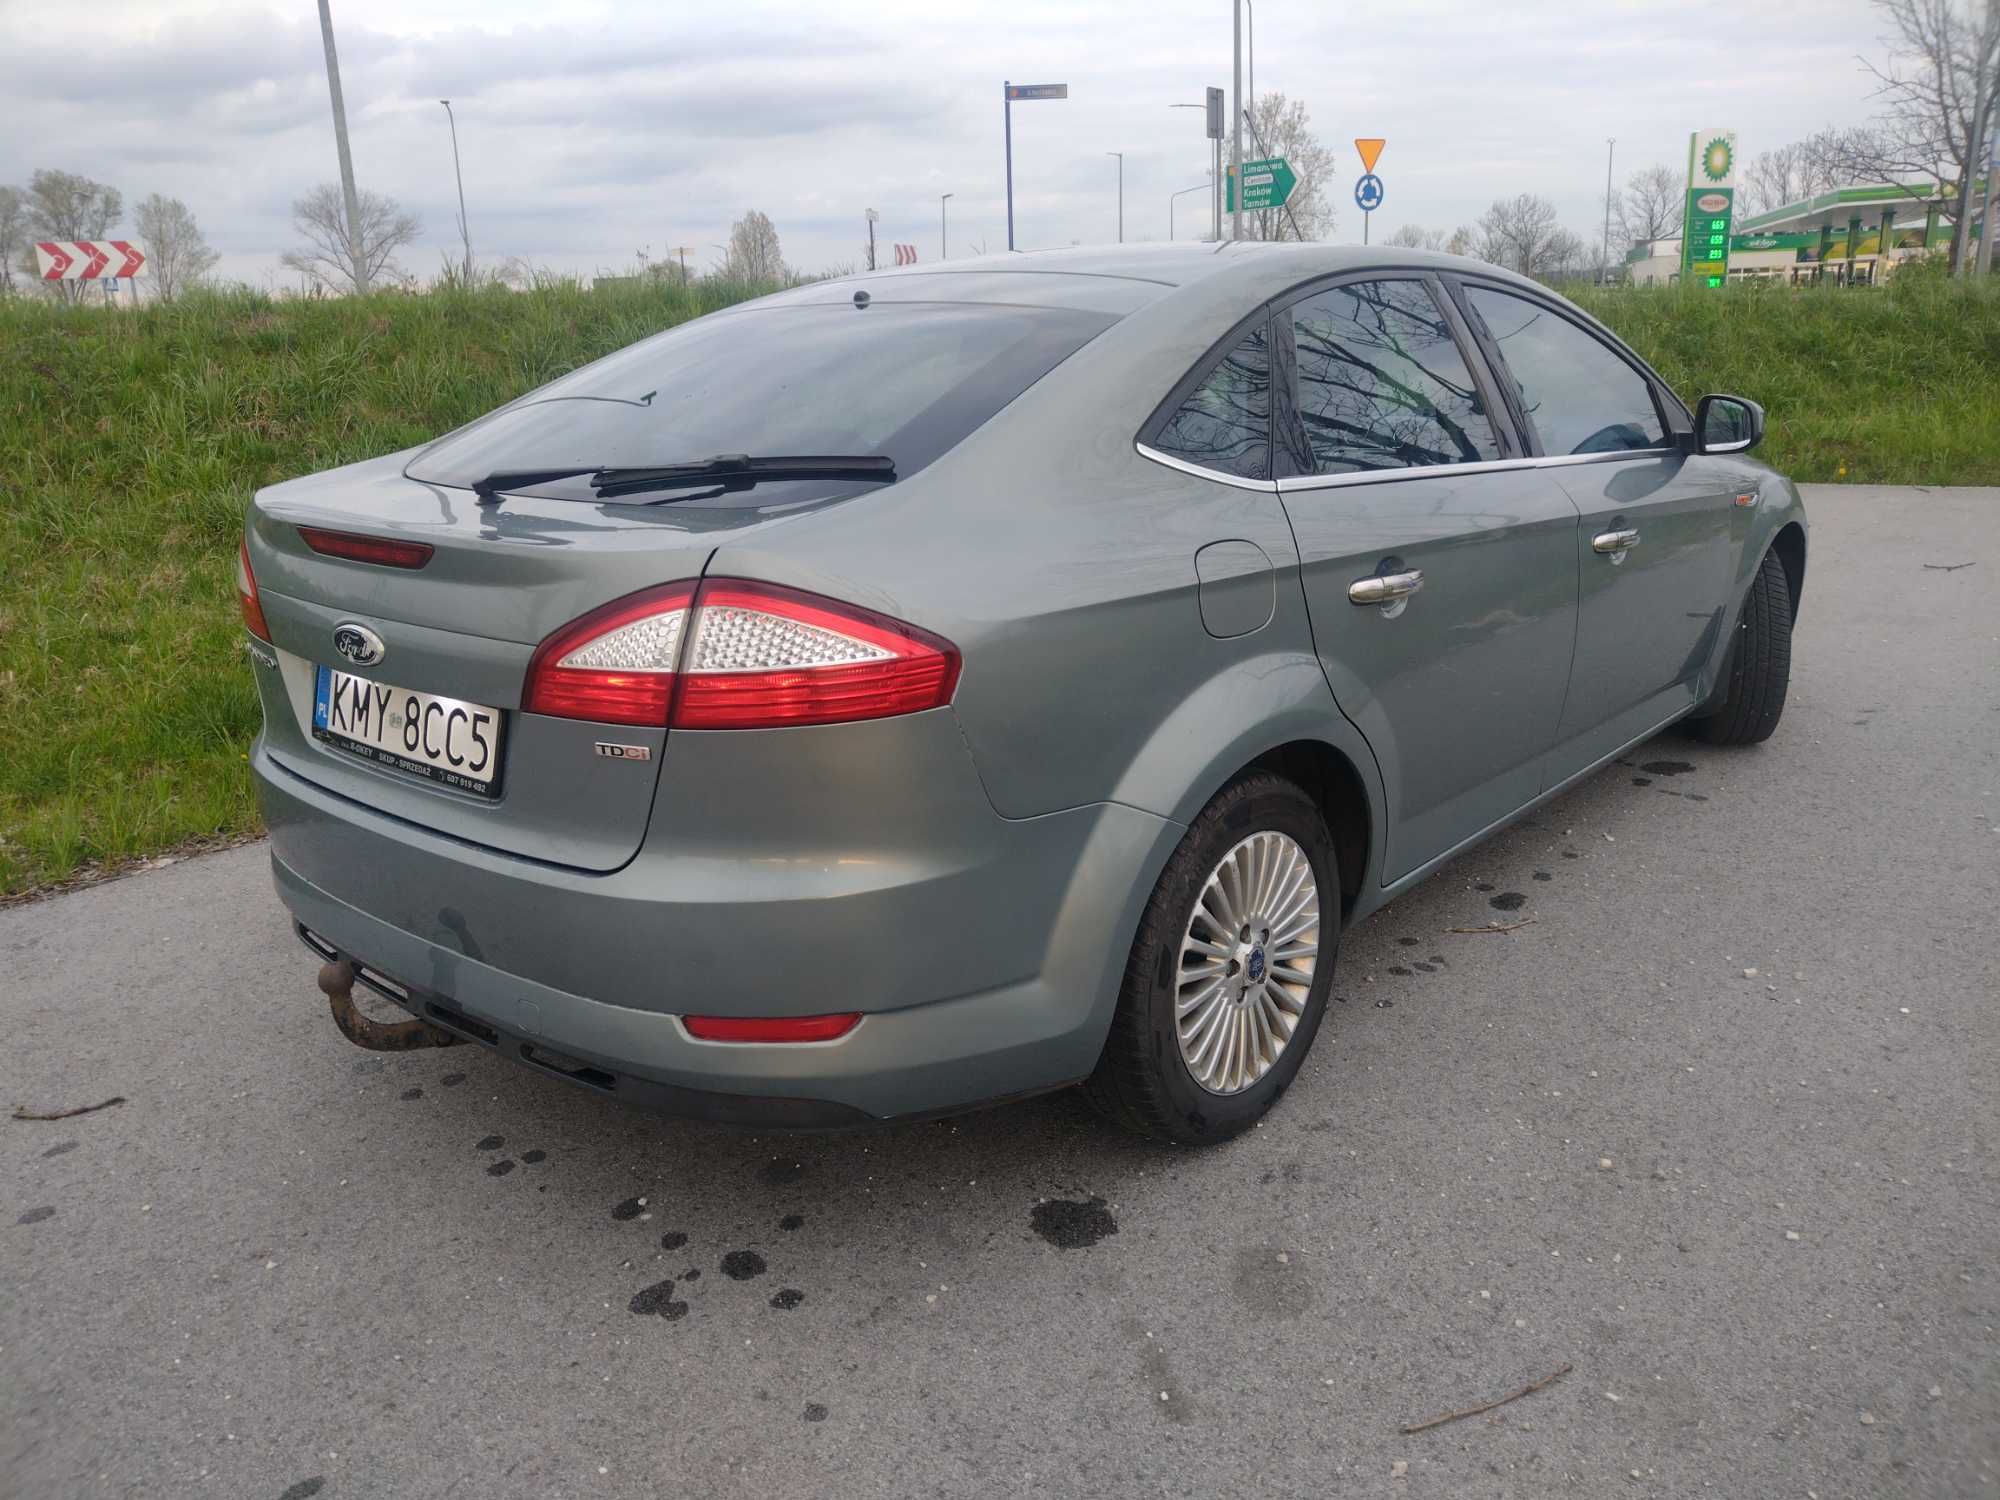 Ford Mondeo 2.0 TDCi 2008